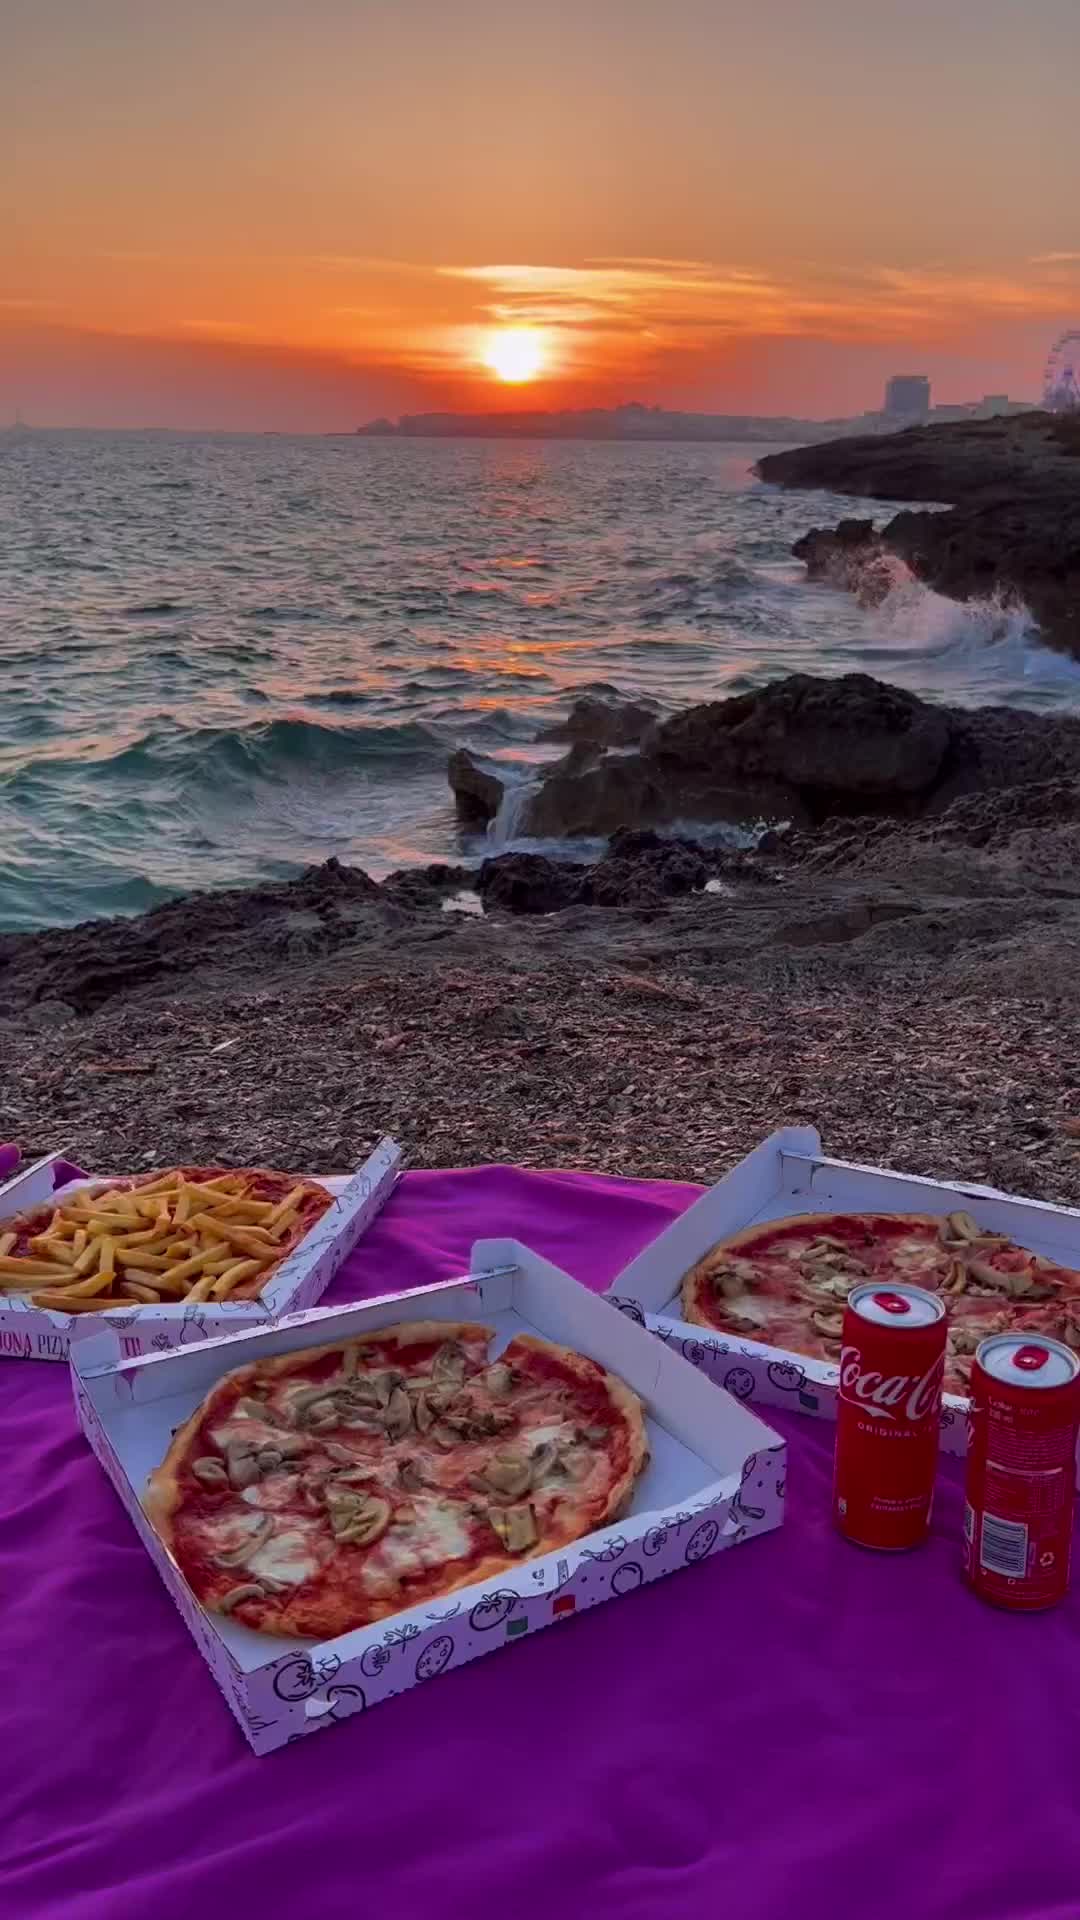 Sunset and Pizza Bliss in Gallipoli, Italy